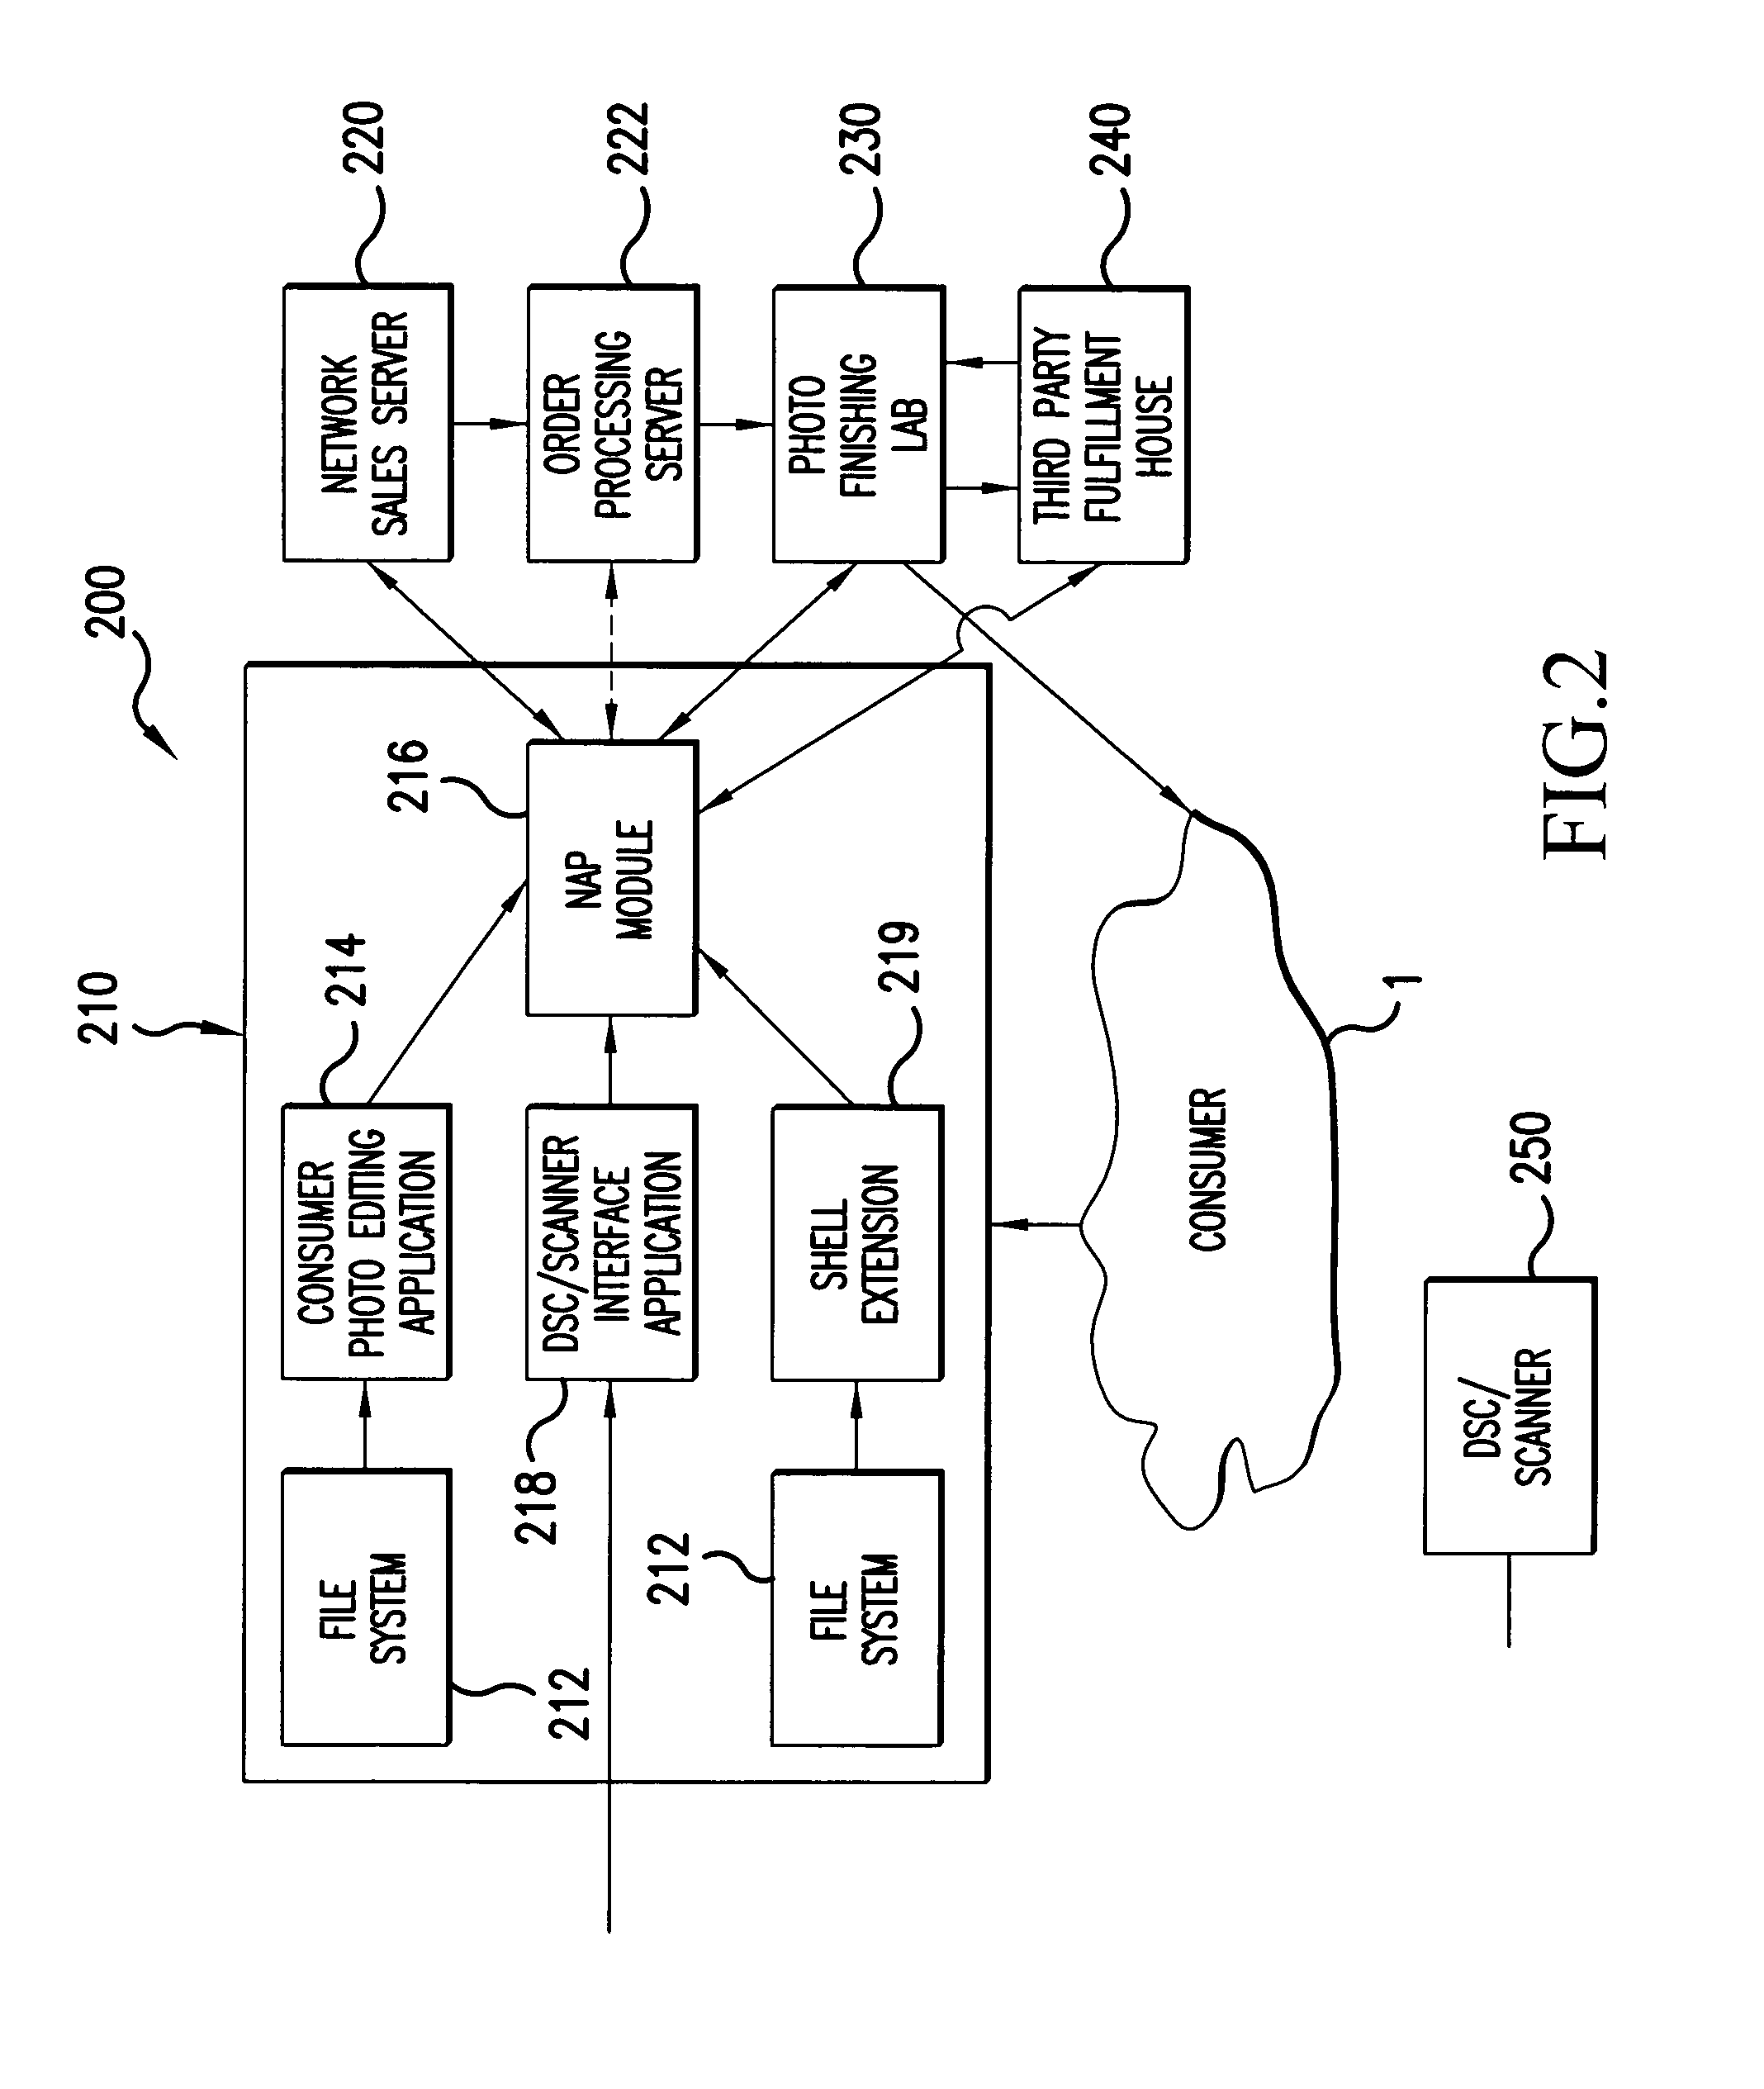 Method, system, article of manufacture, and propagated signal for electronically ordering photographic prints and gifts from photos